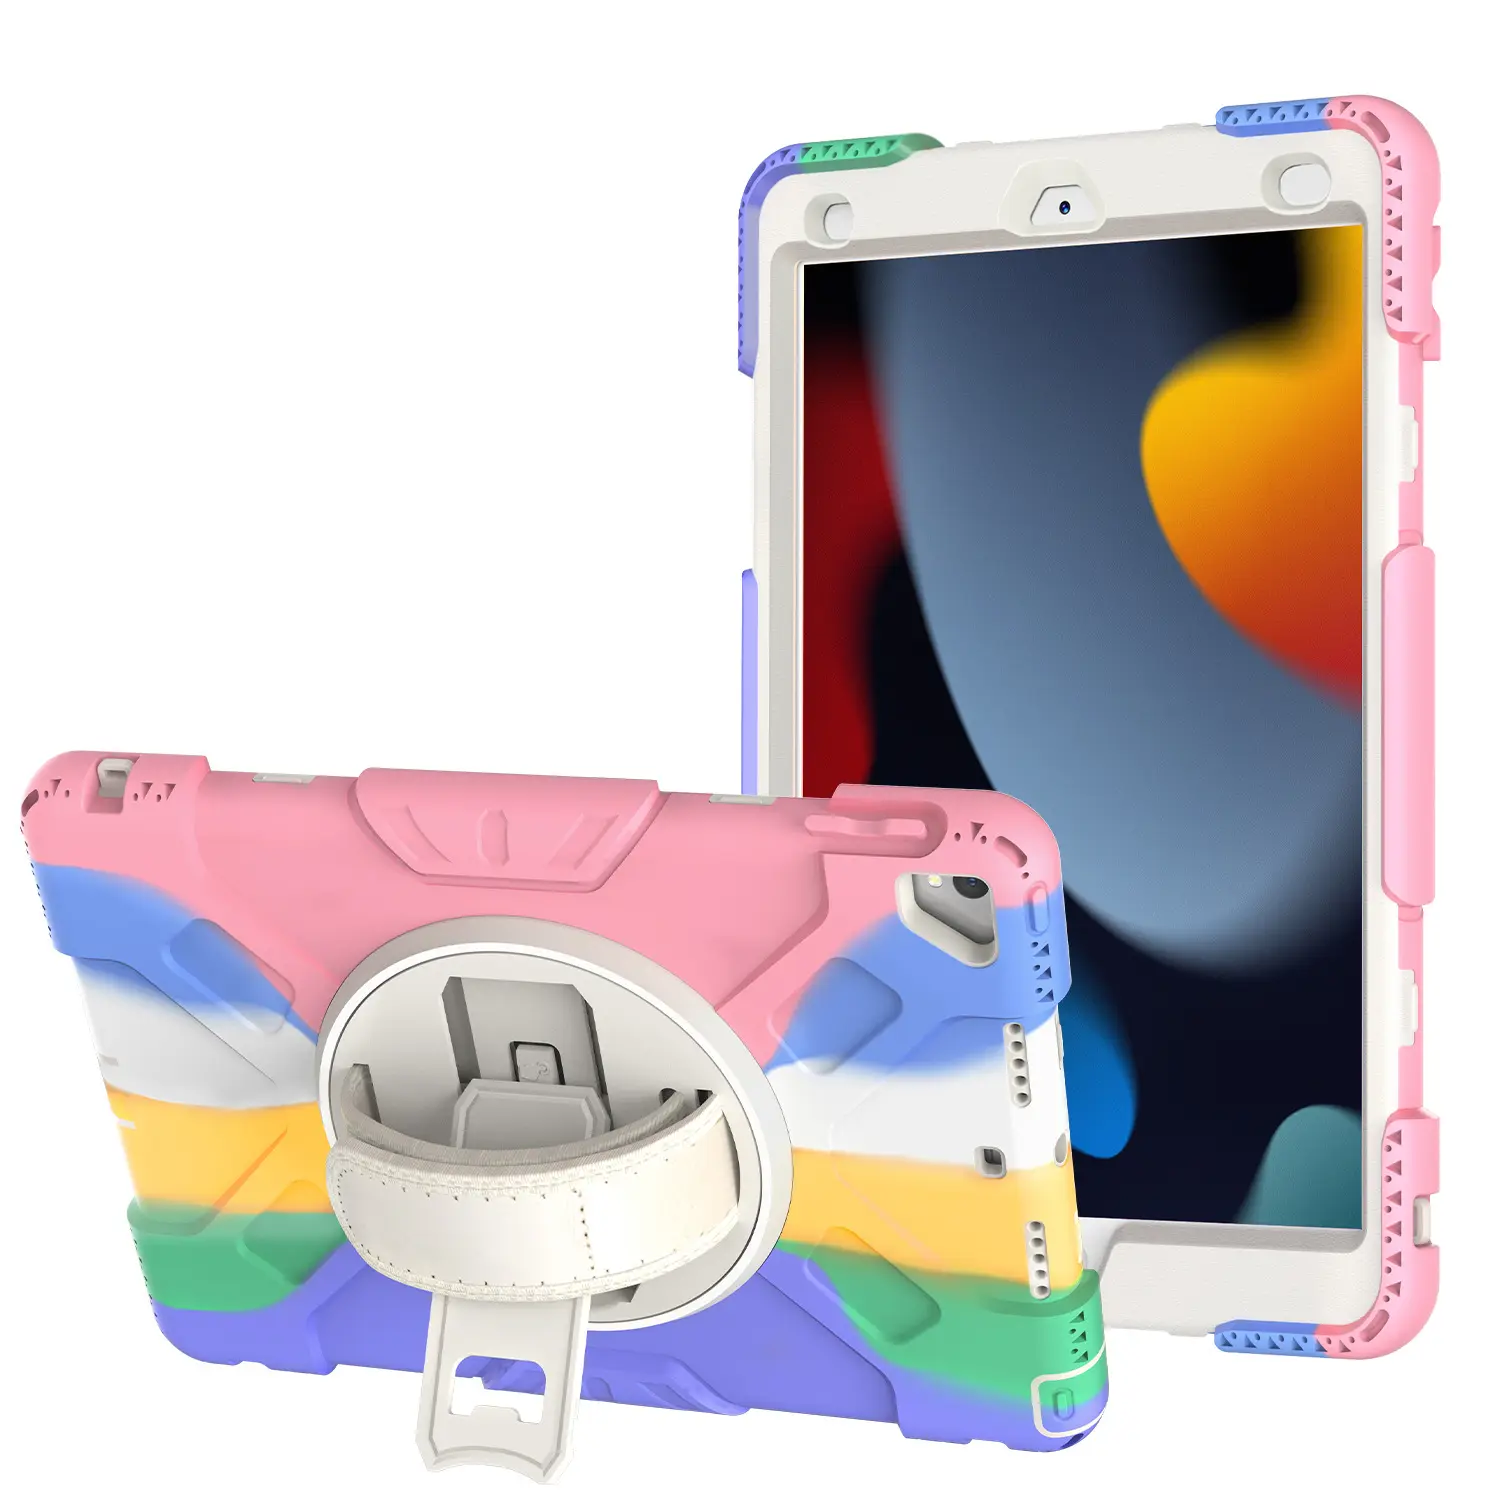 6th 7 th 8 th generation case cover for kids silicone material tablet slim case with holder for ipad mini 10.2 inch 10.5 inch